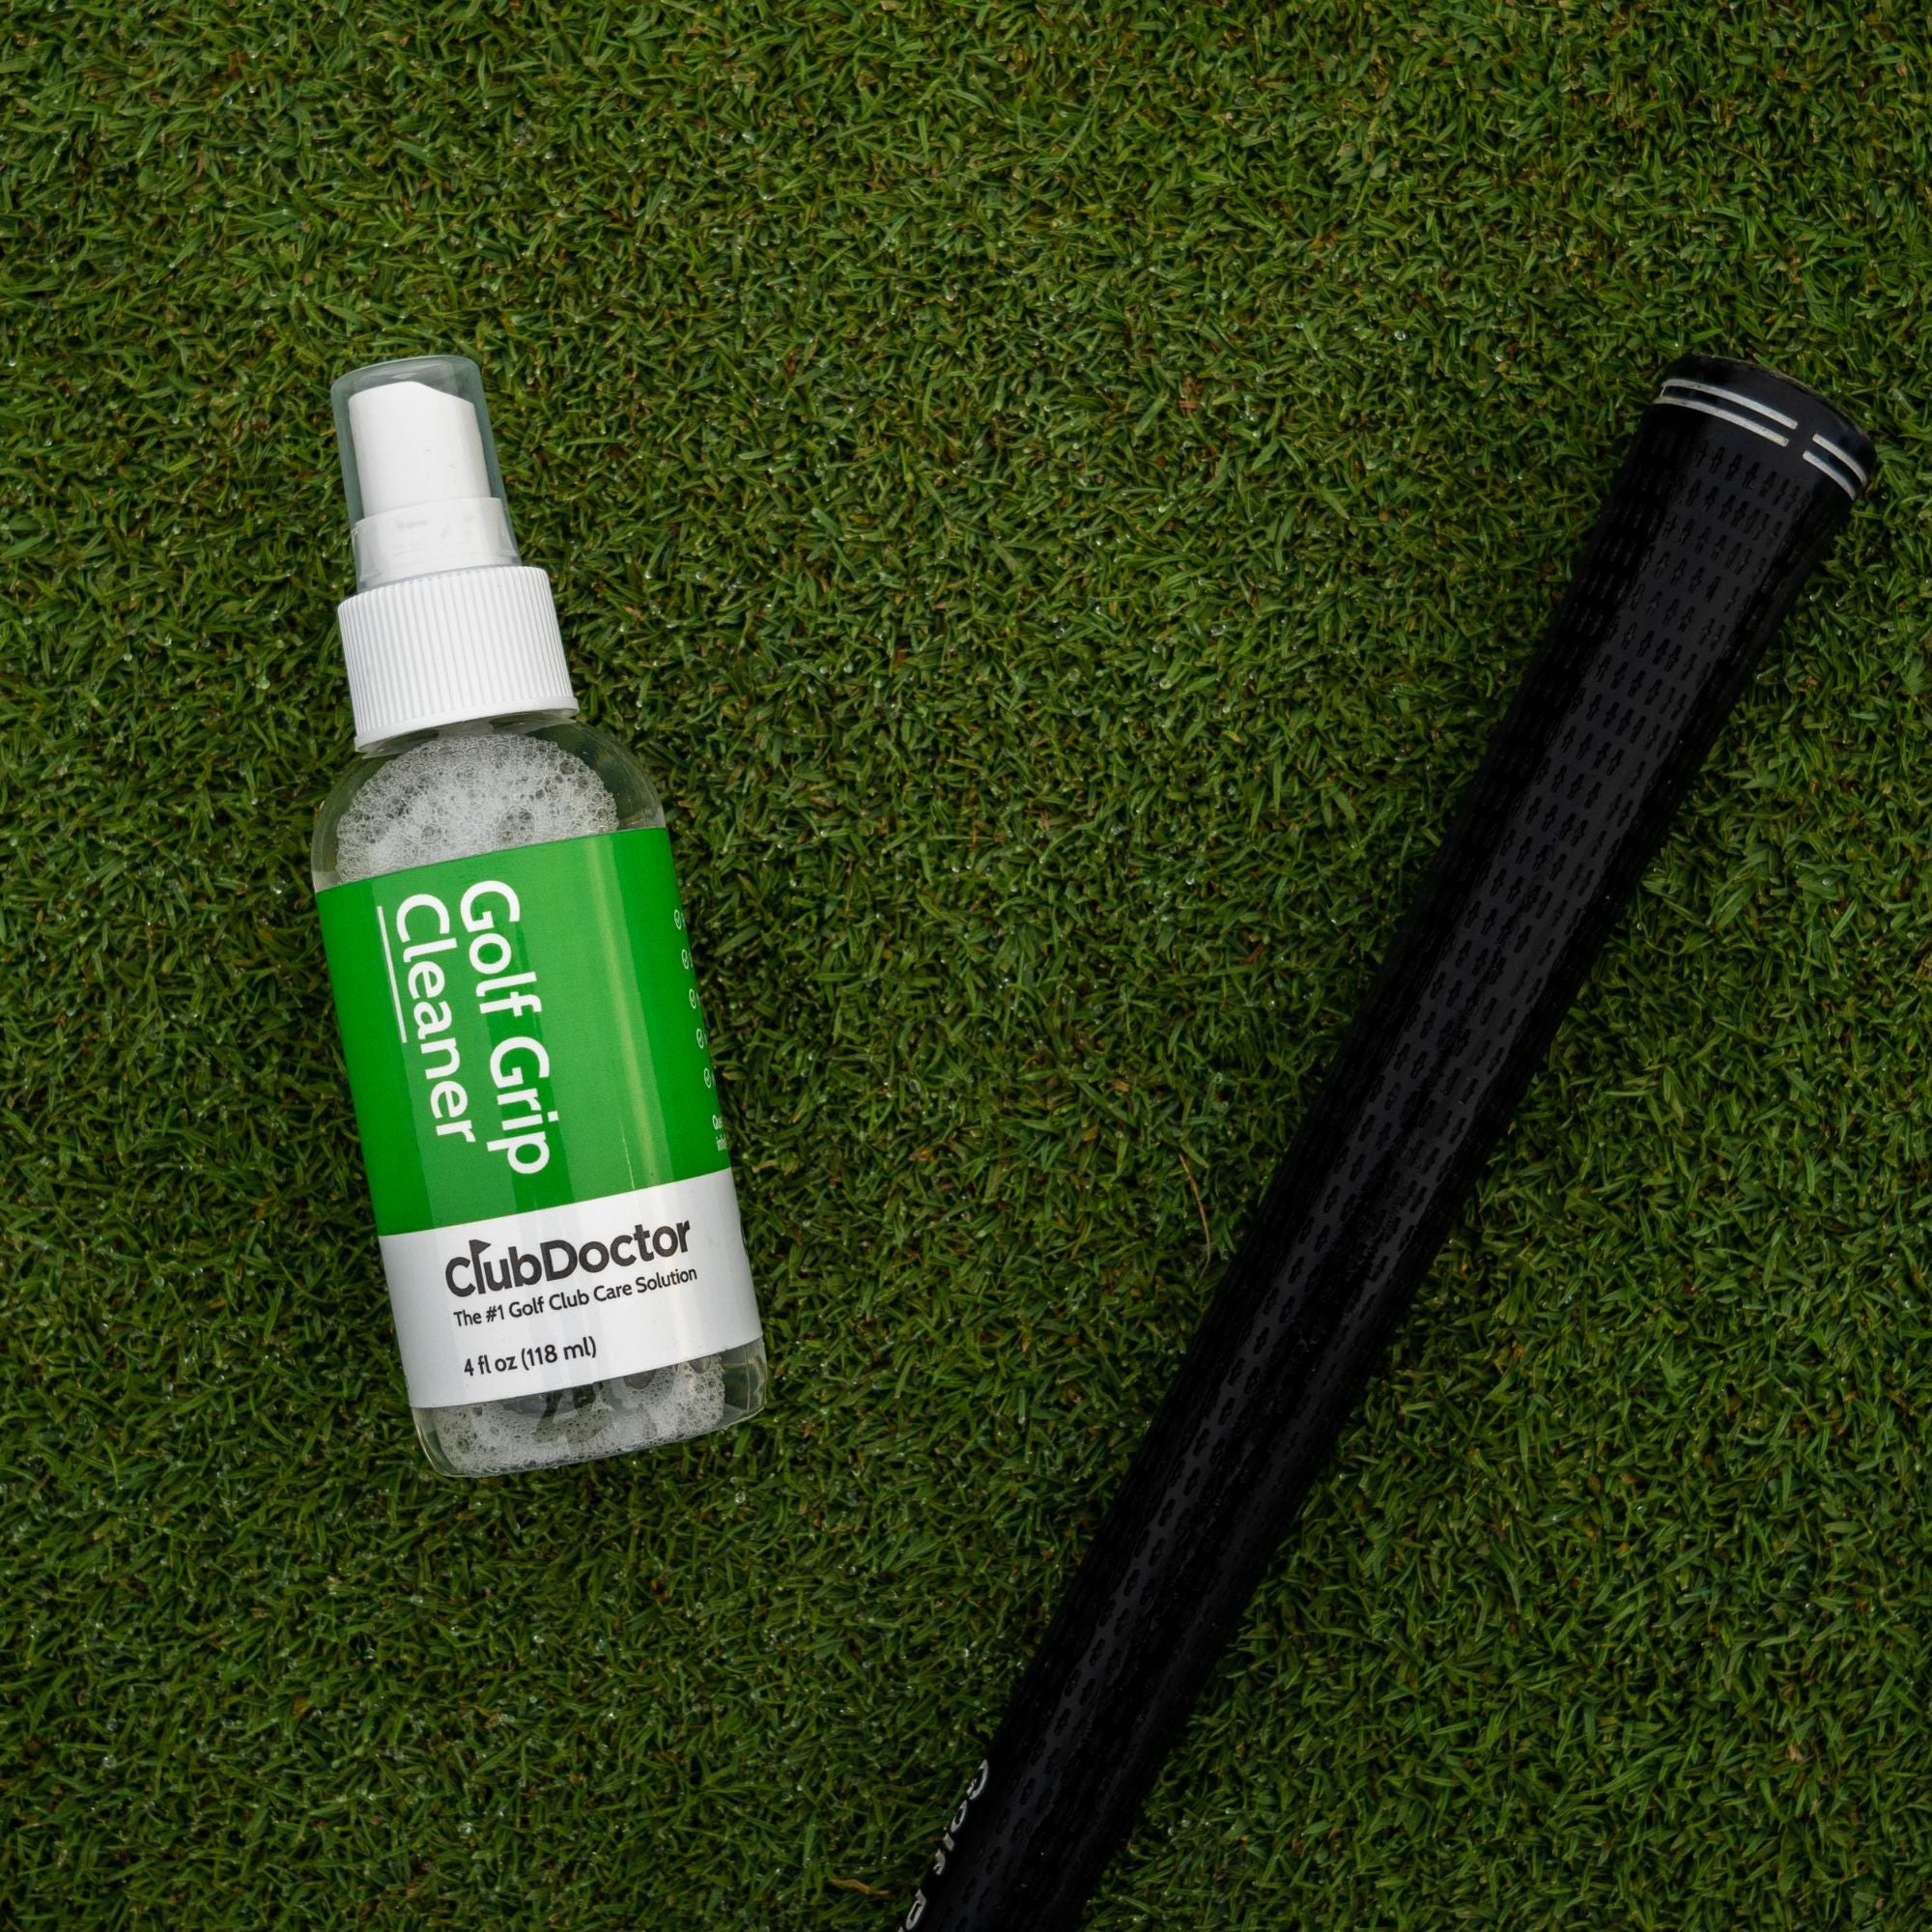 club doctor golf grip cleaner bottle laying on the ground next to a golf grip